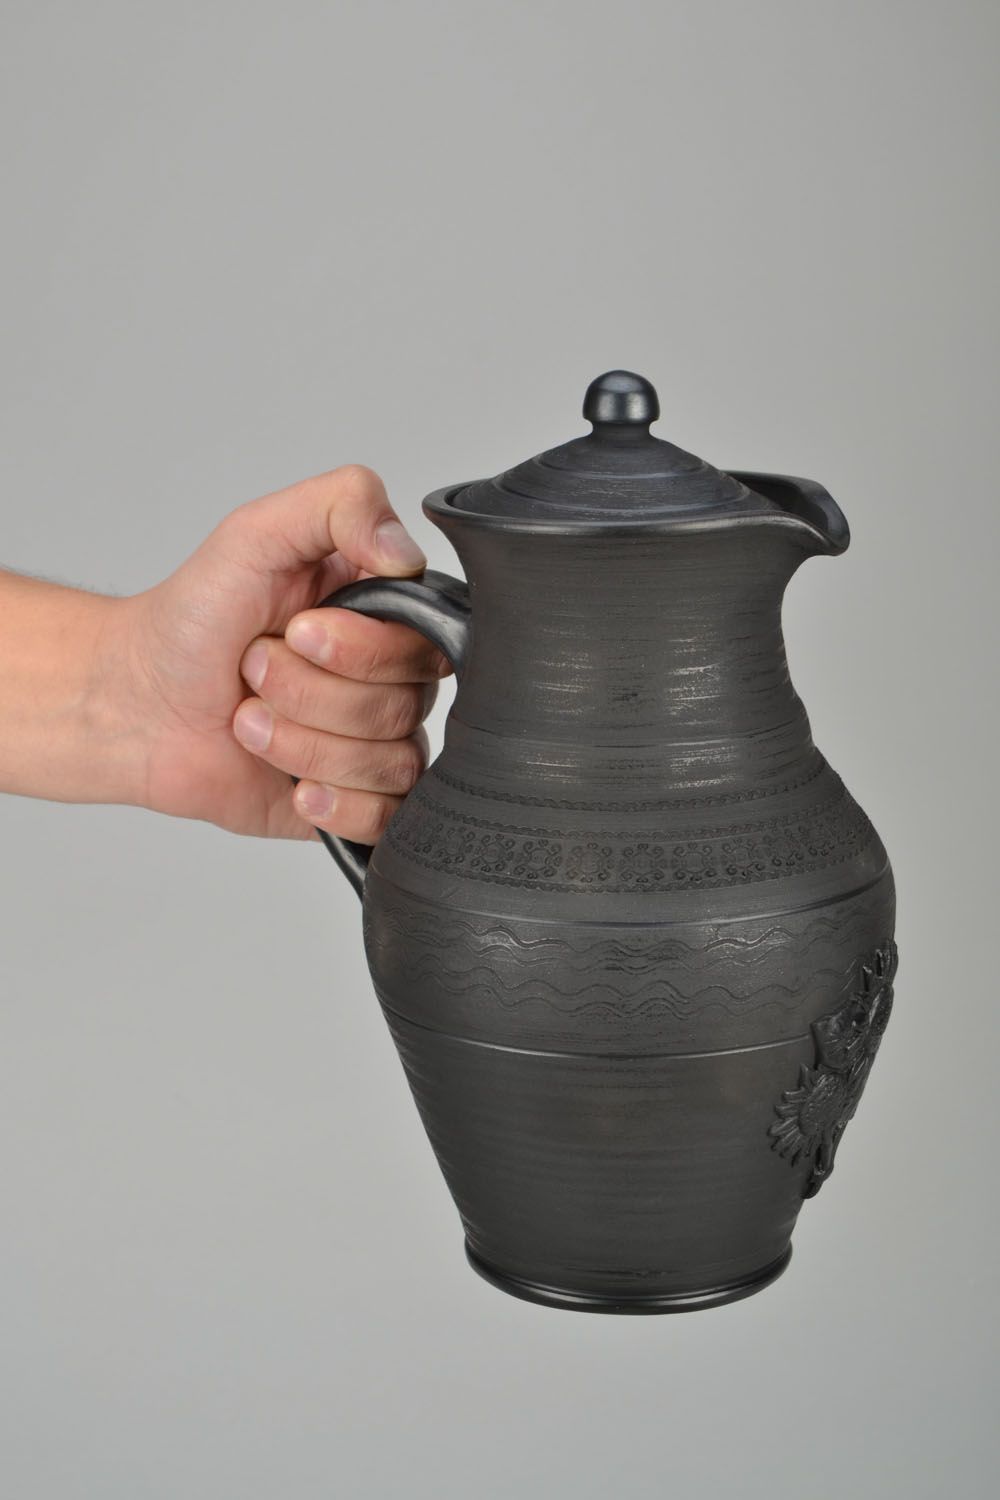 100 oz ceramic black clay pitcher with handle, lid, and molded décor 2,25 lb photo 2